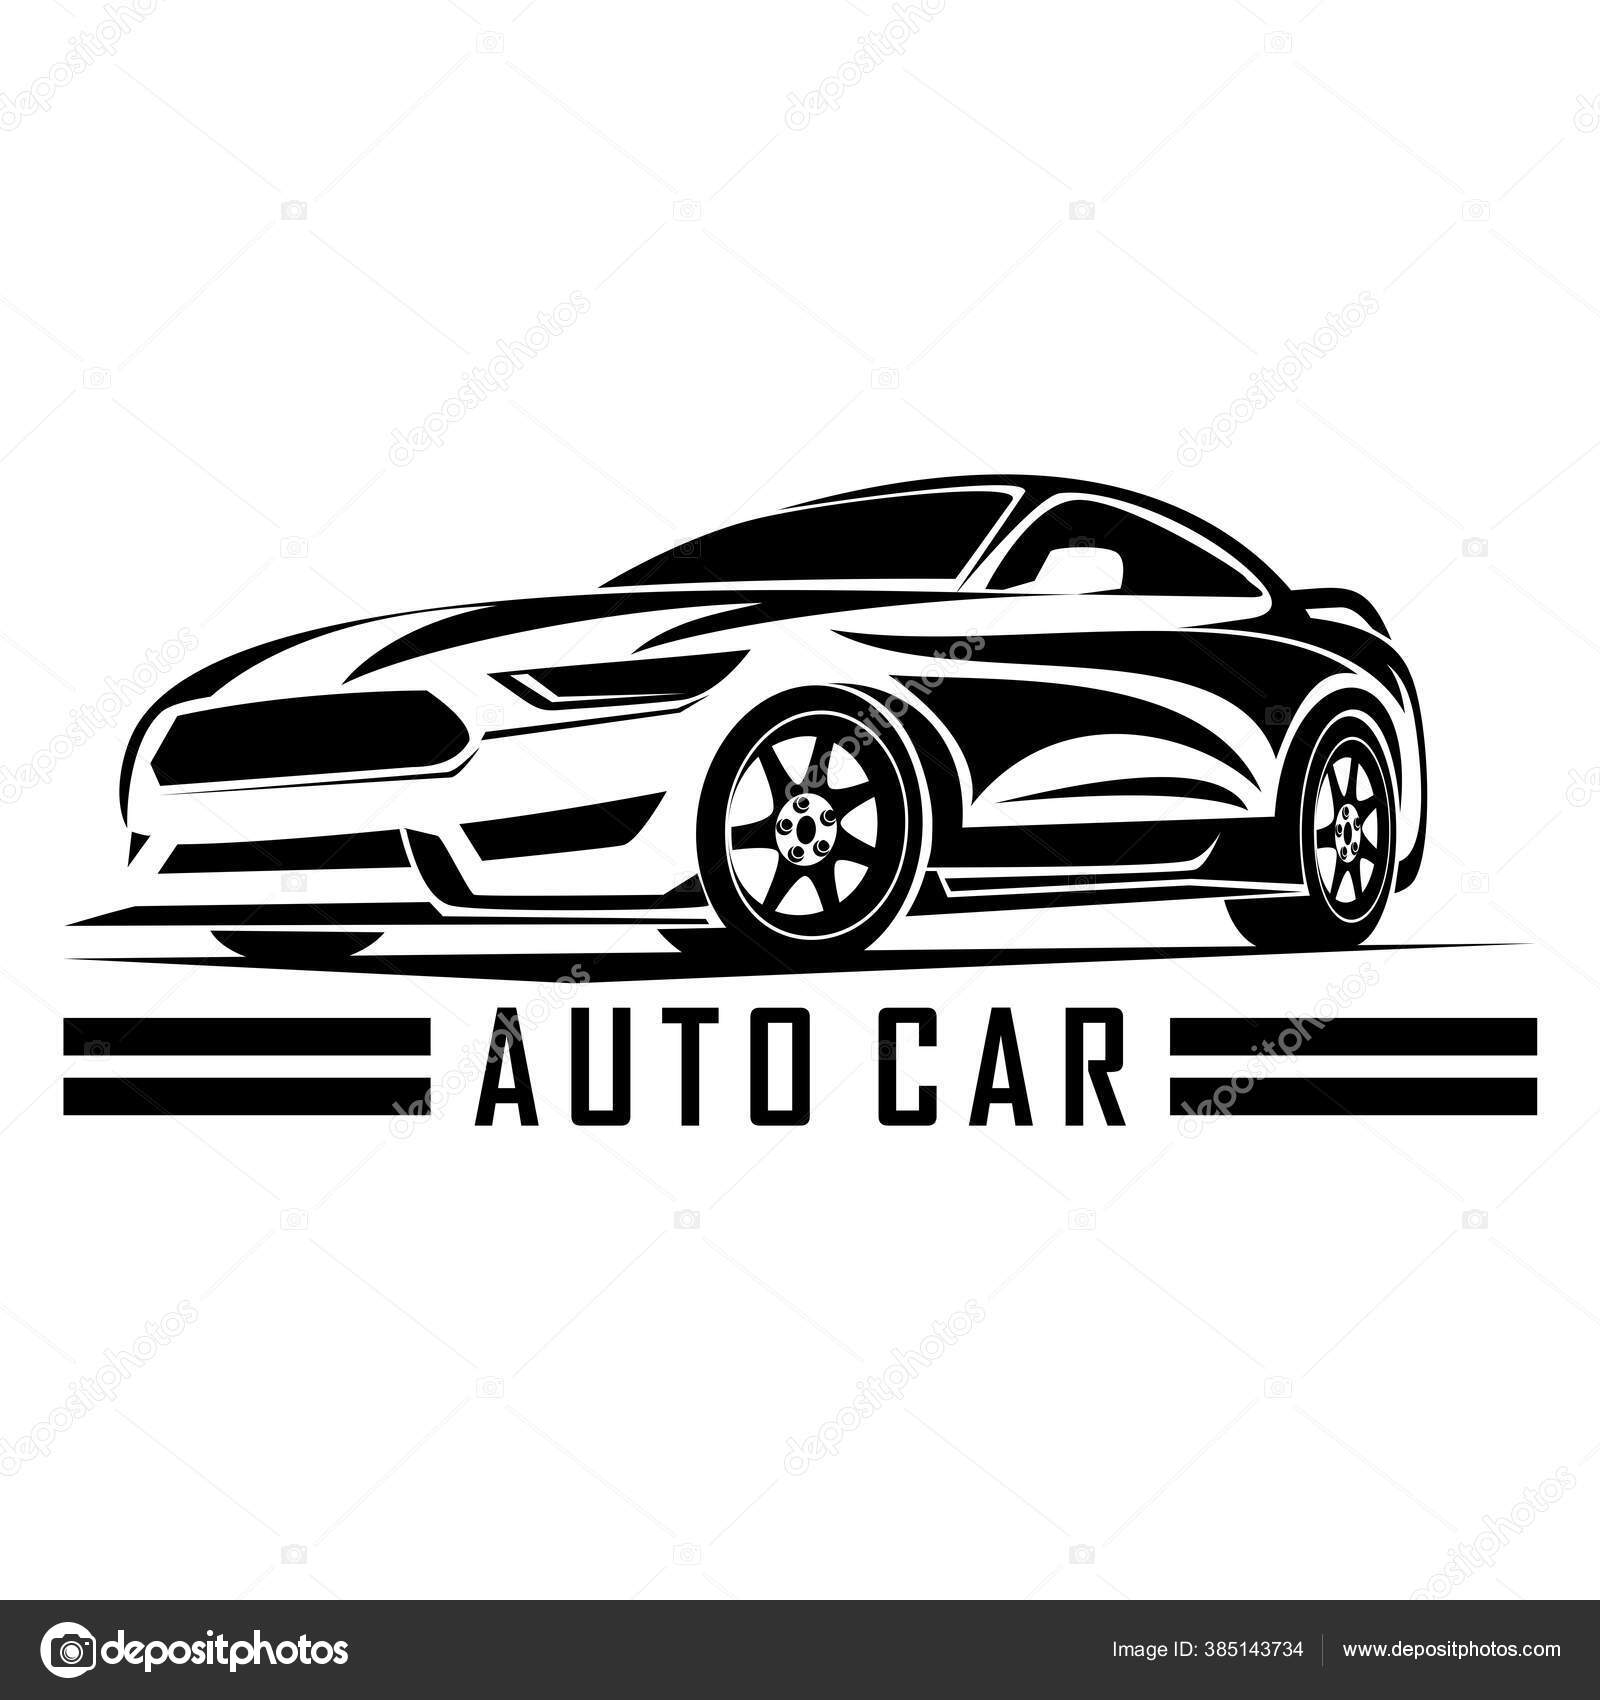 Car Wash and Clean Logo Vector Stock Vector - Illustration of